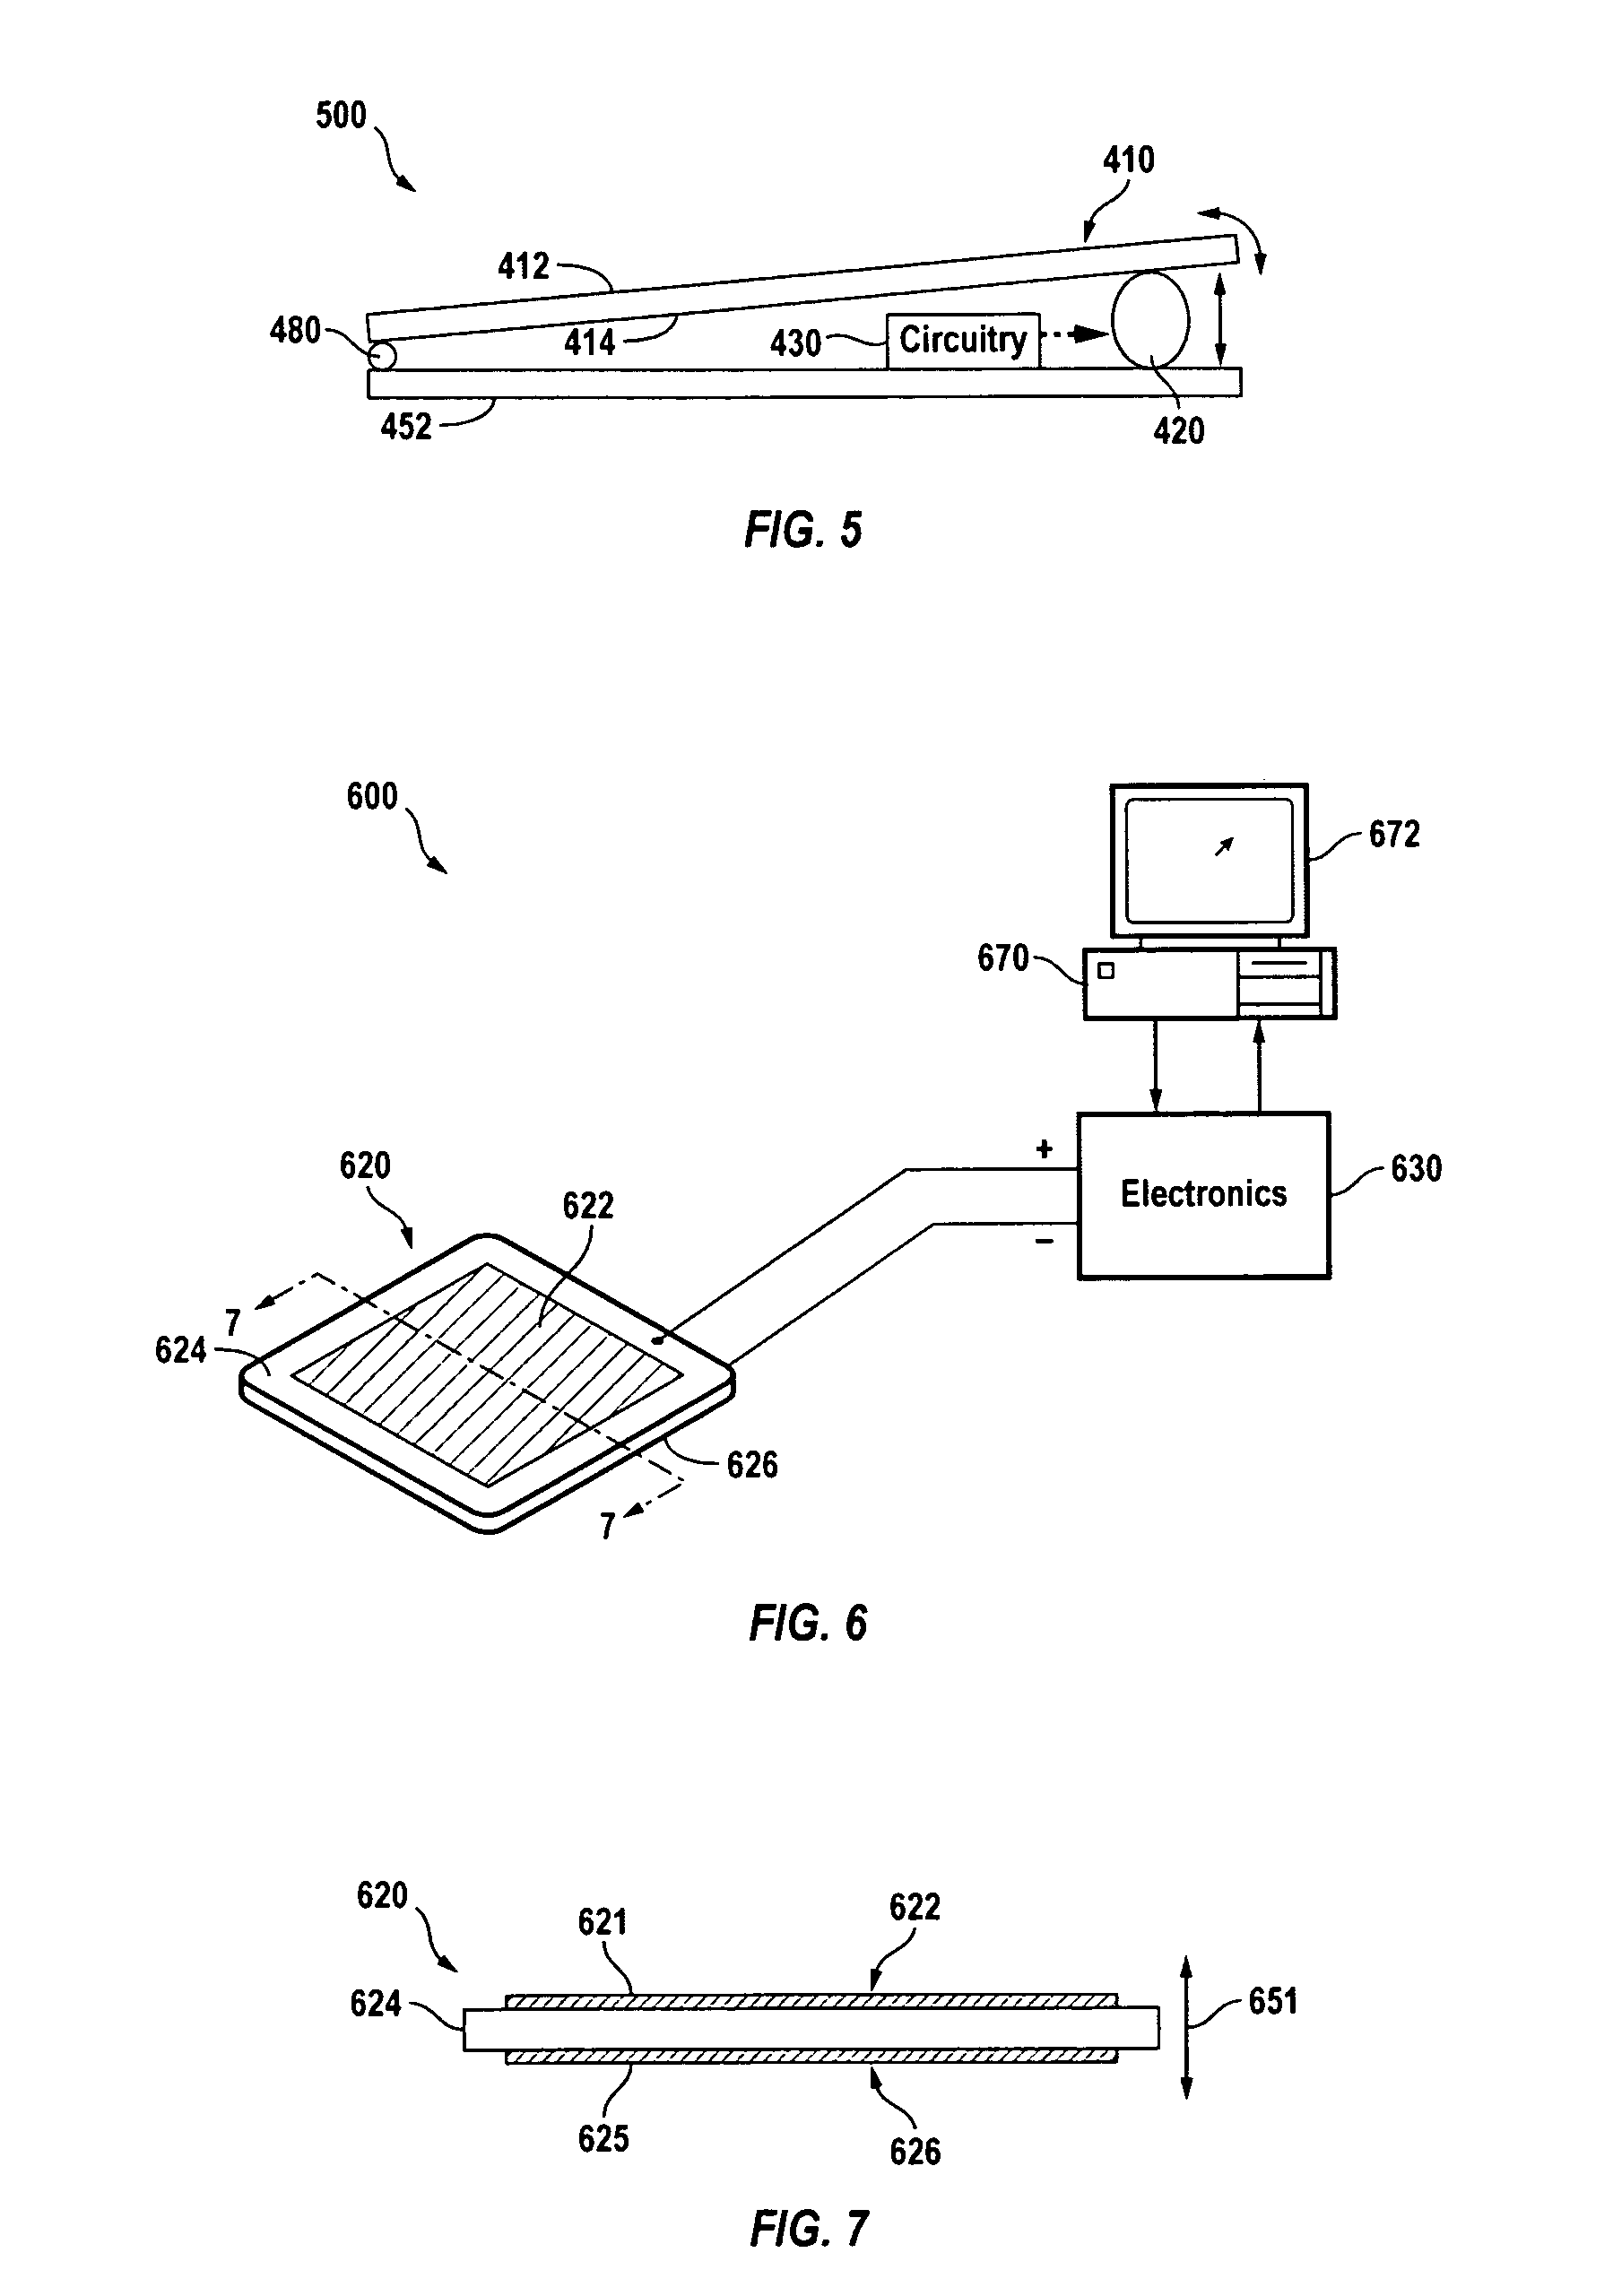 Haptic pads for use with user-interface devices